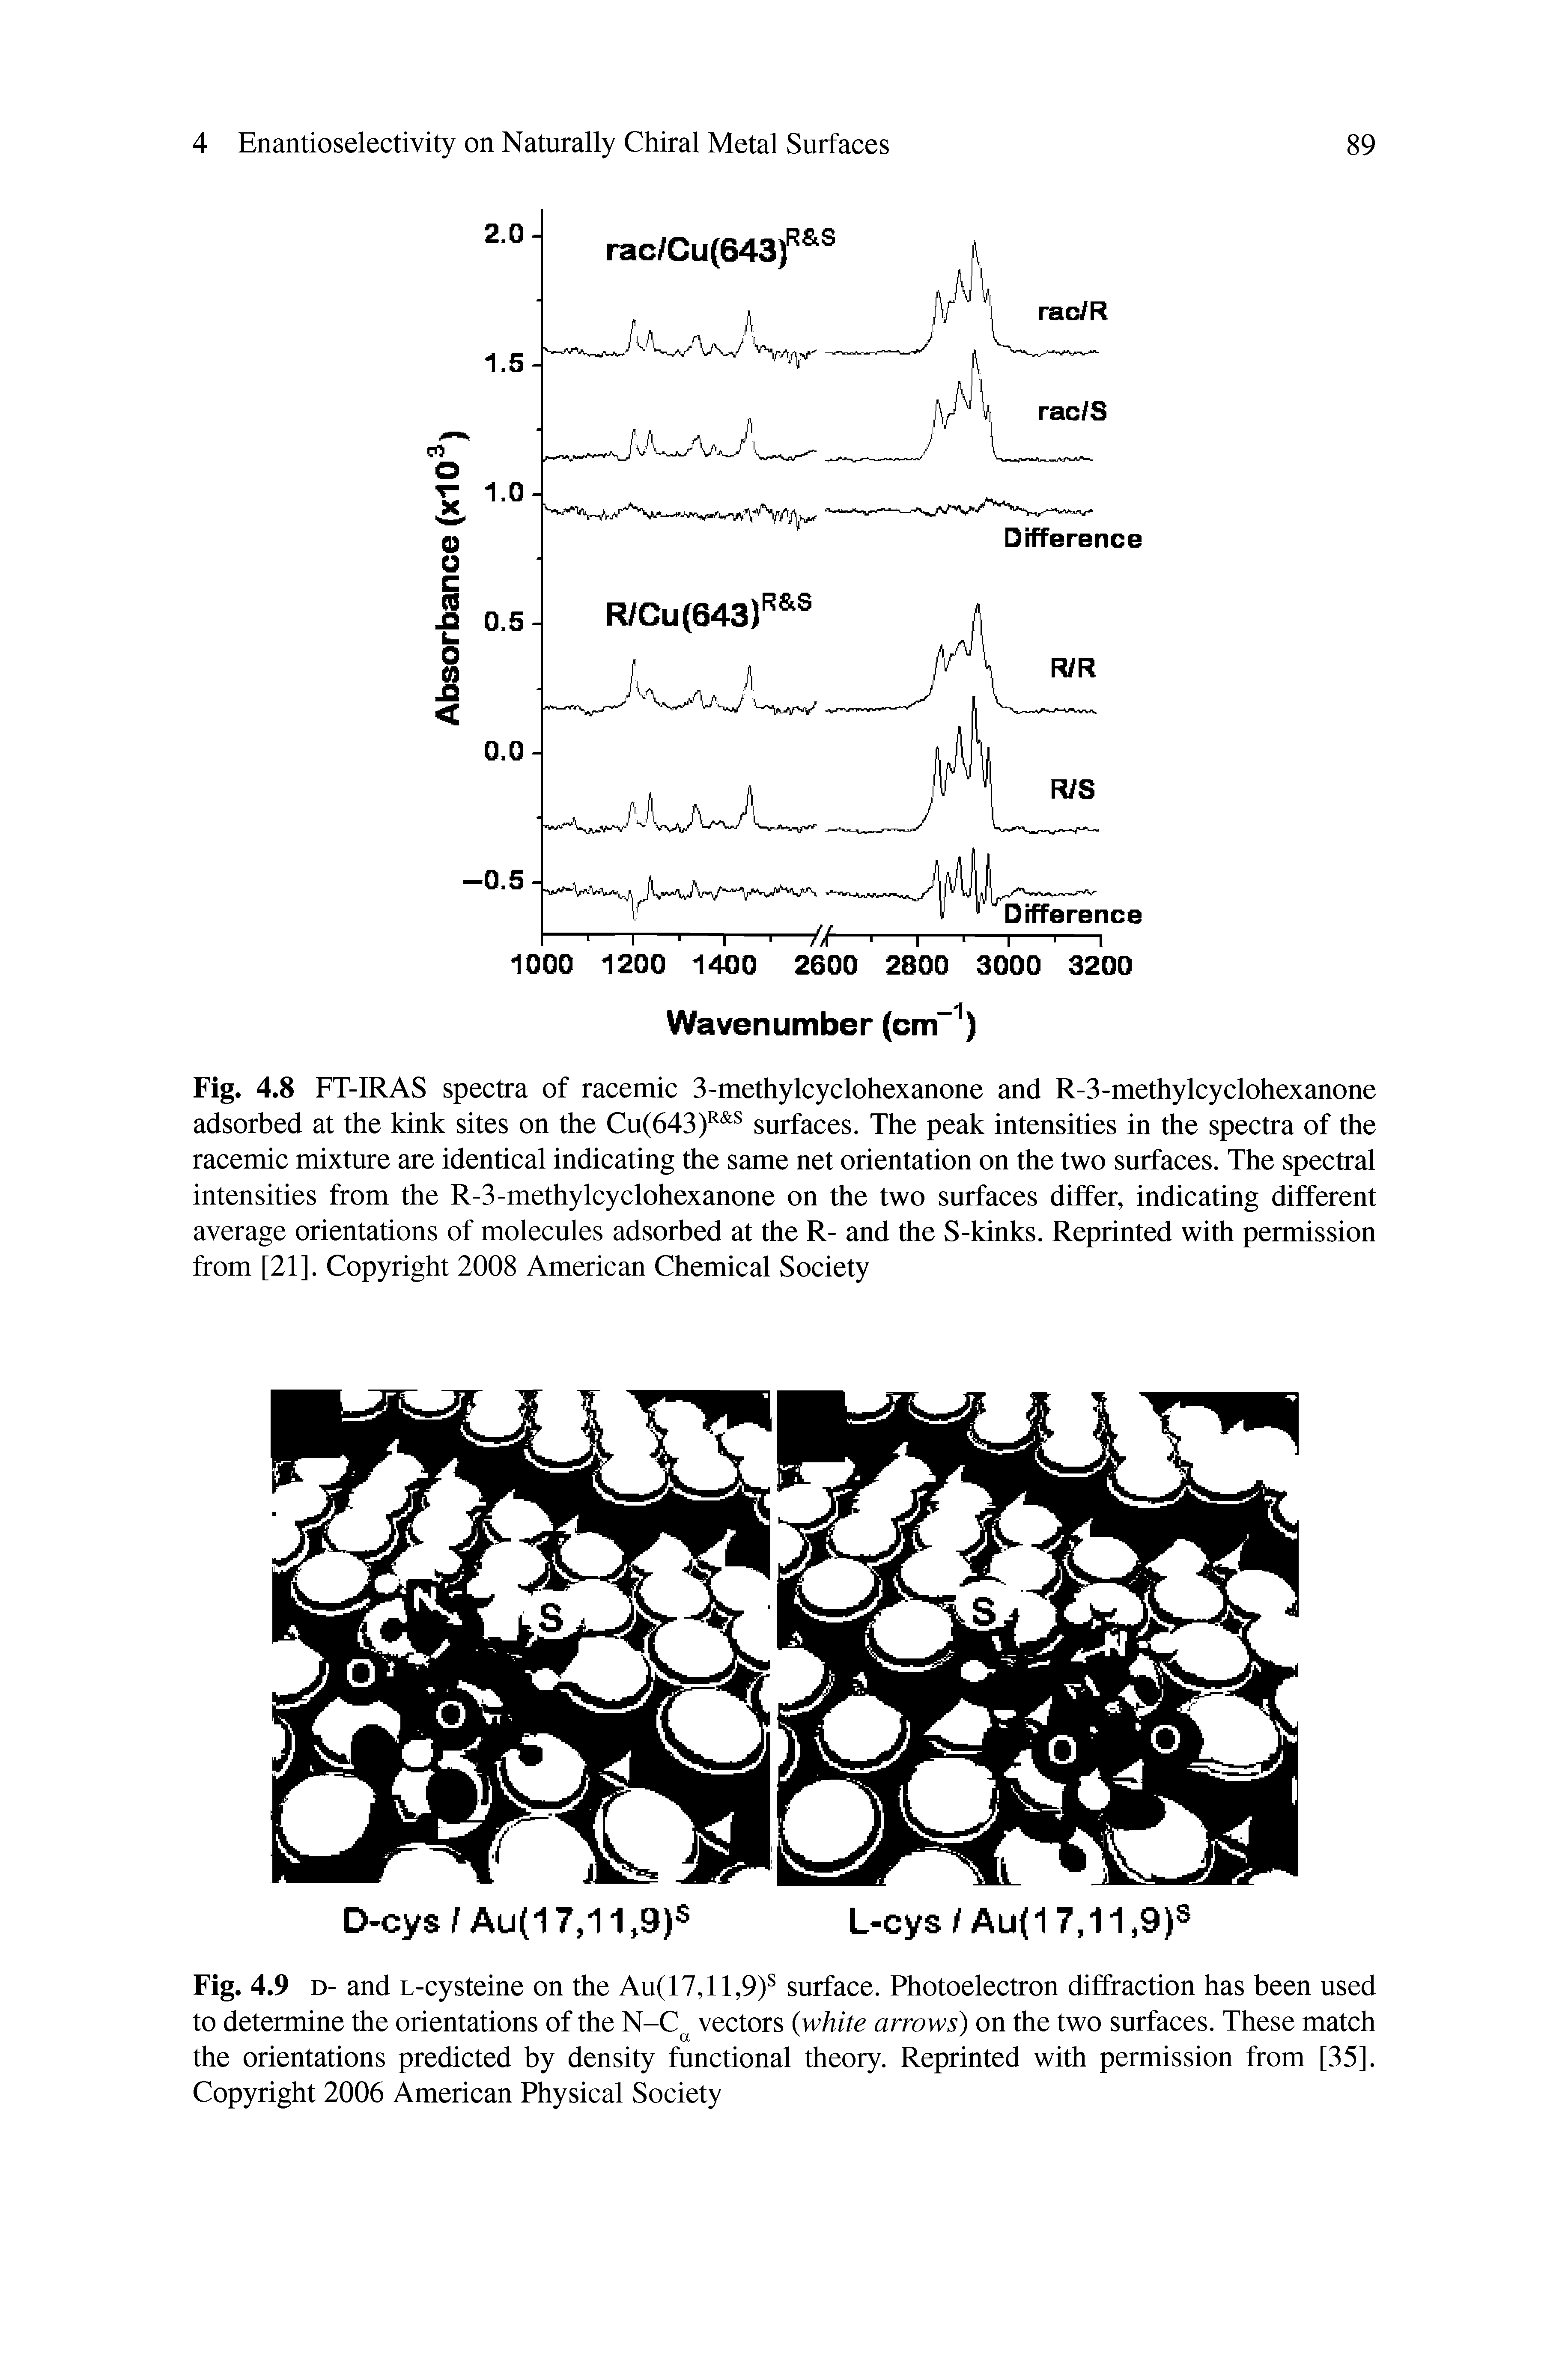 Fig. 4.9 D- and L-cysteine on the Au(17,ll,9) surface. Photoelectron diffraction has been used to determine the orientations of the N-C vectors white arrows) on the two surfaces. These match the orientations predicted by density functional theory. Reprinted with permission from [35]. Copyright 2006 American Physical Society...